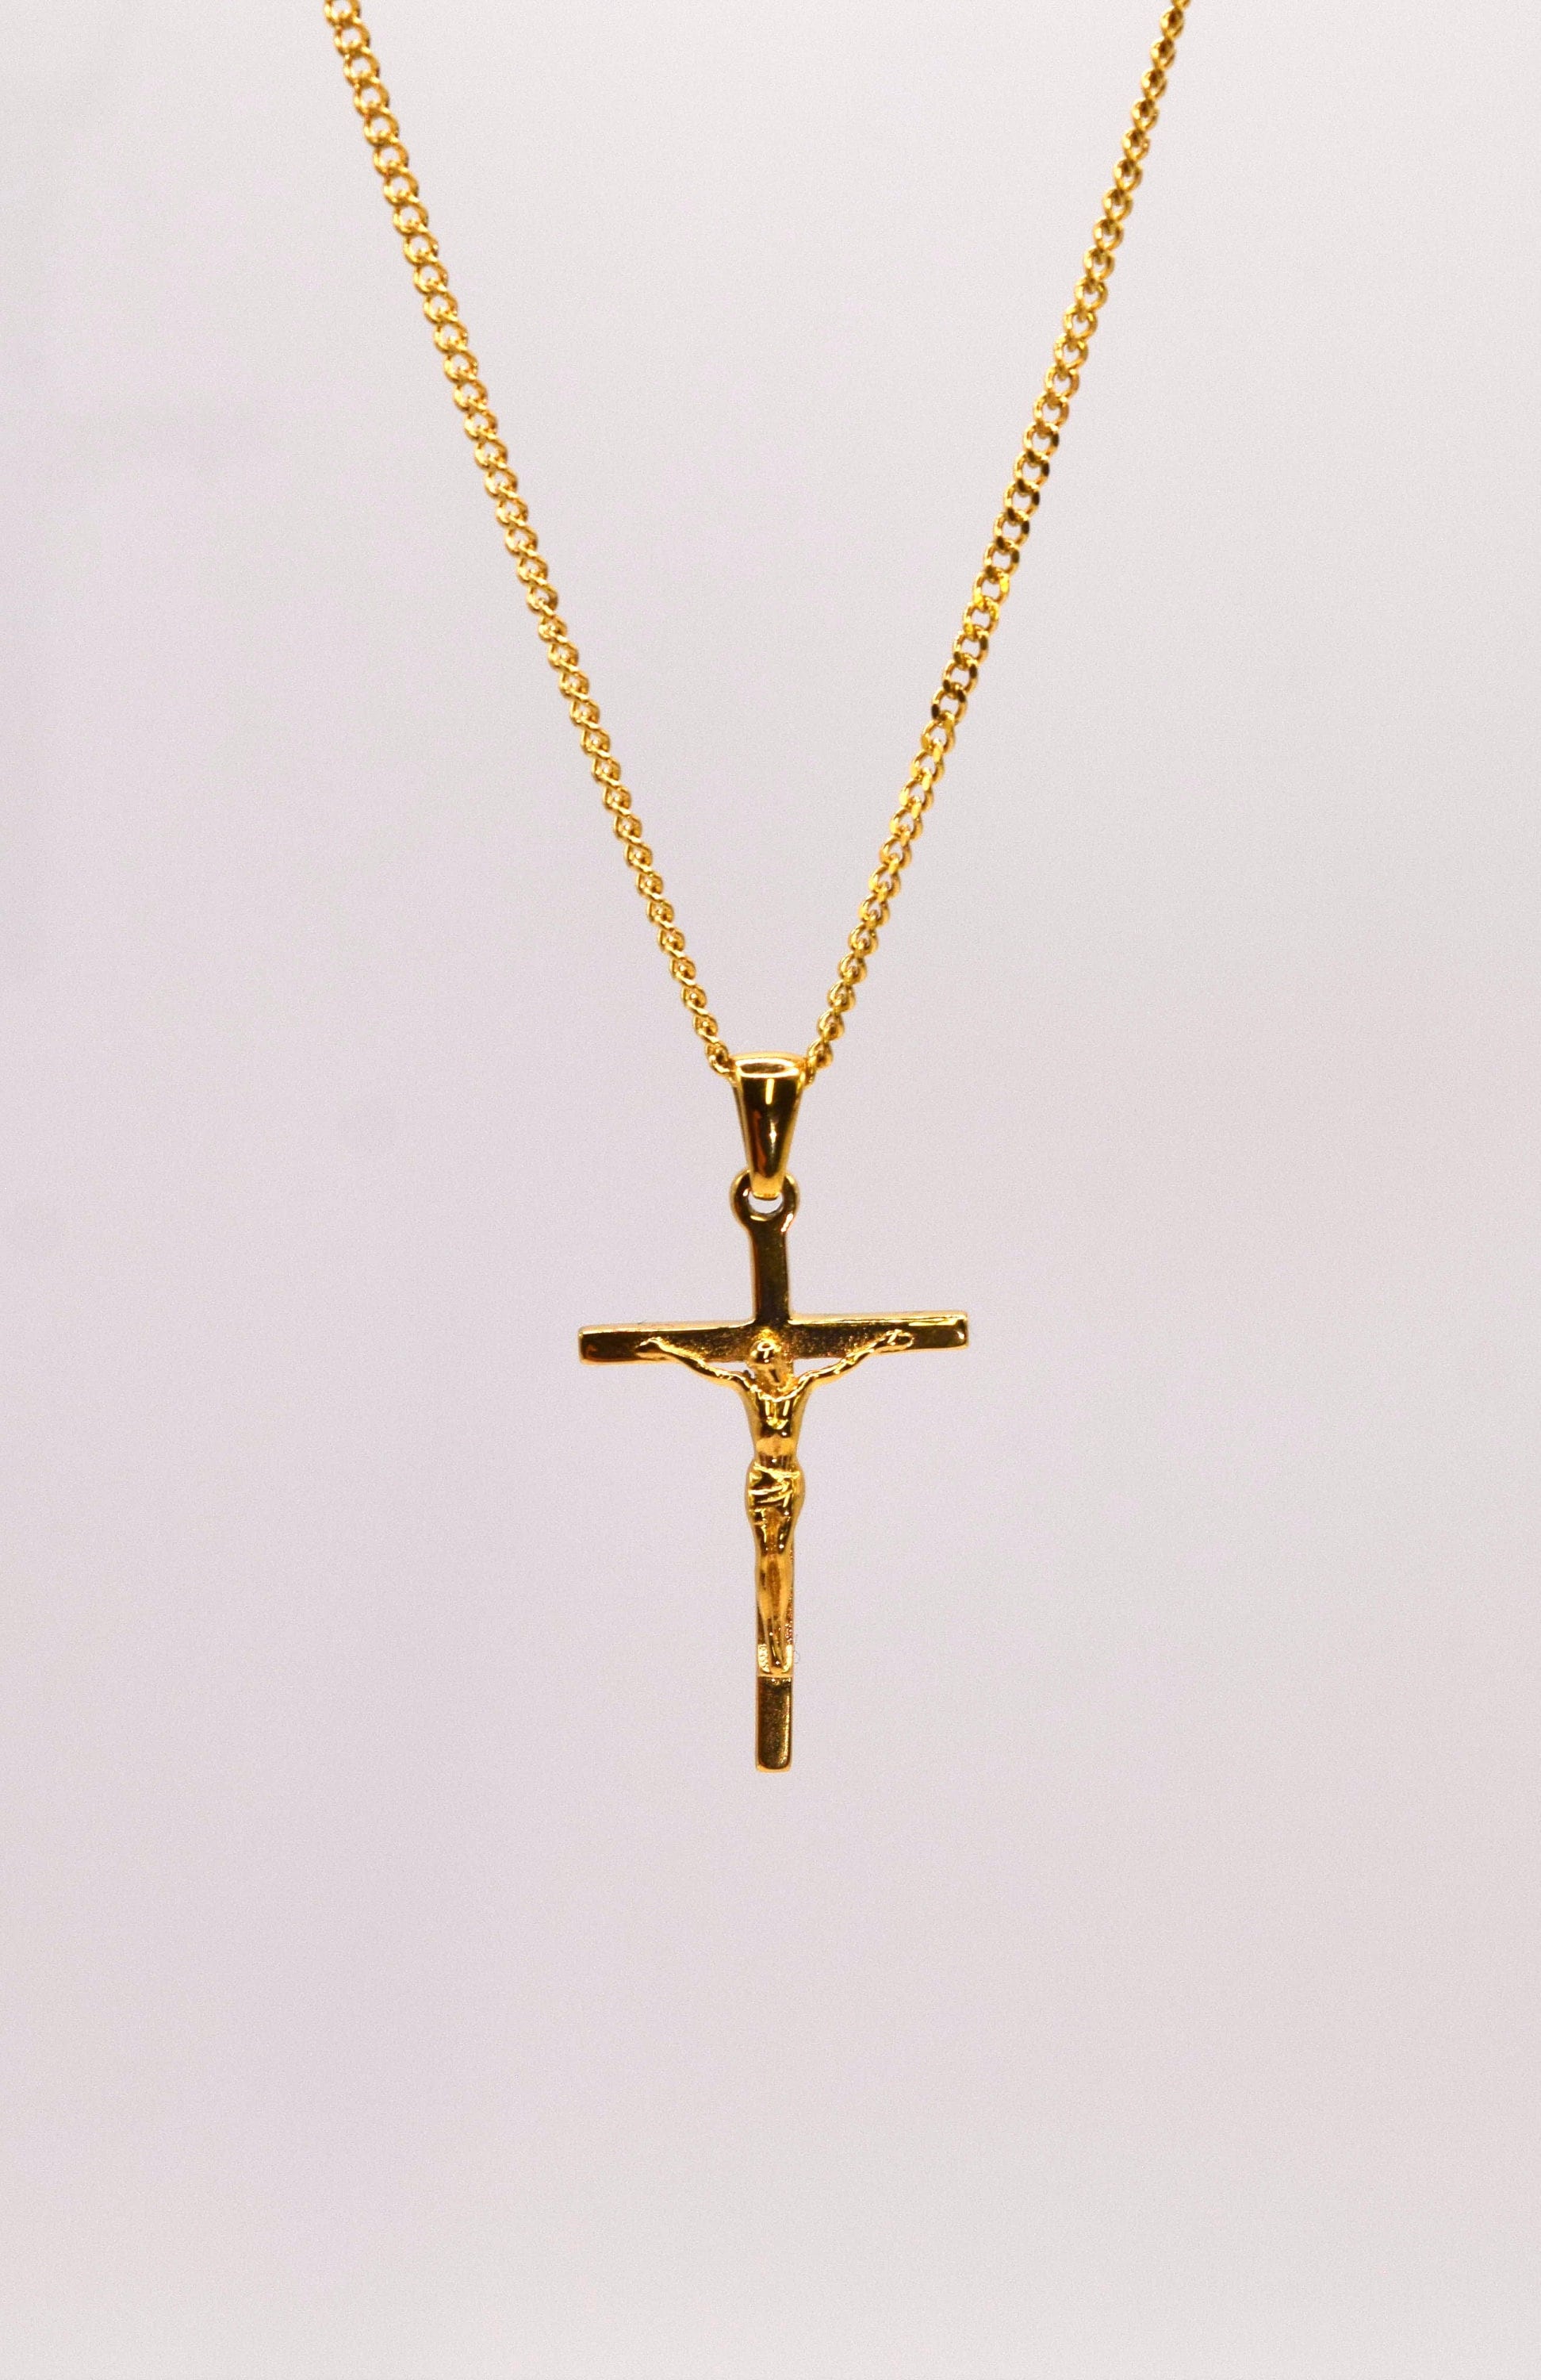 Men's Stainless Steel Jesus Gold Tone Cross Pendant Braid Link Necklace Cool 11G 